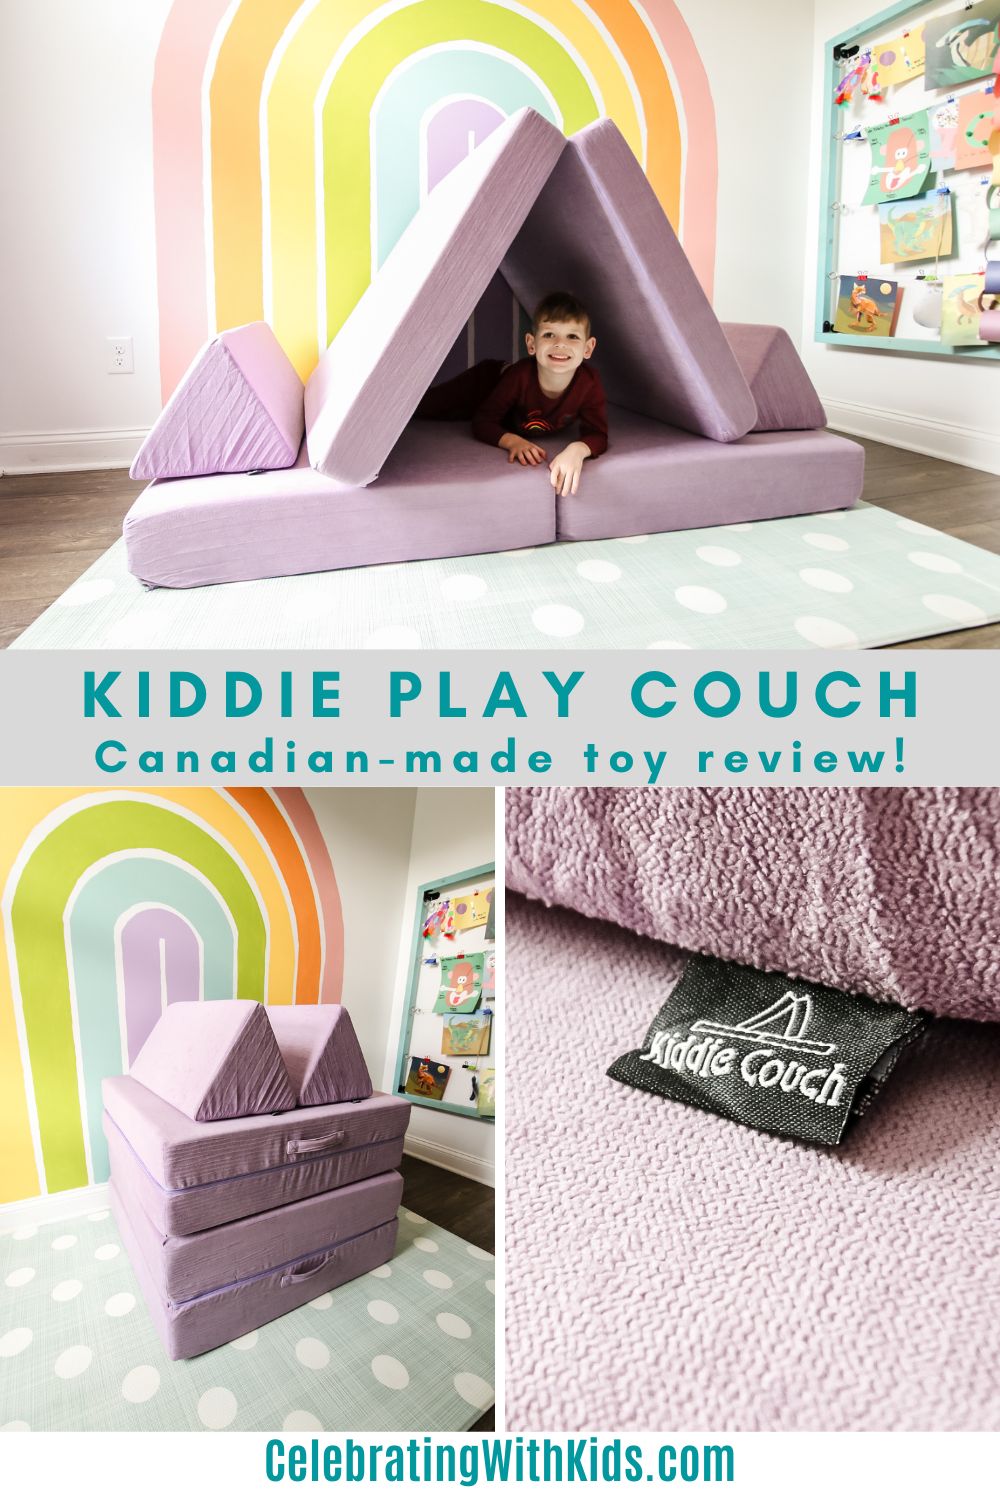 Kiddie play couch review